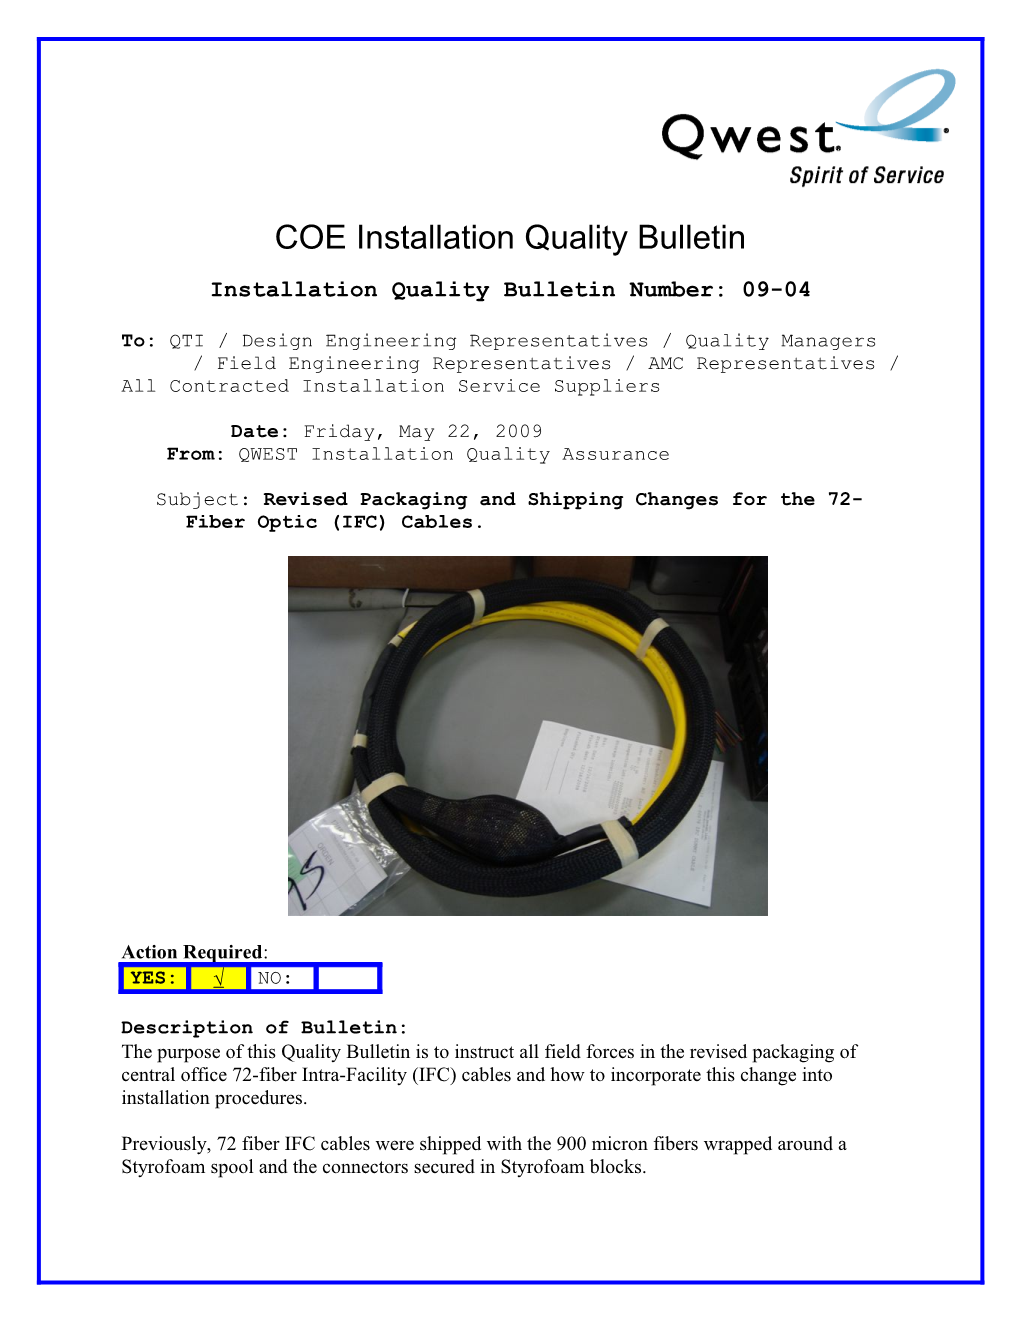 Installation Quality Bulletin Number: 09-04